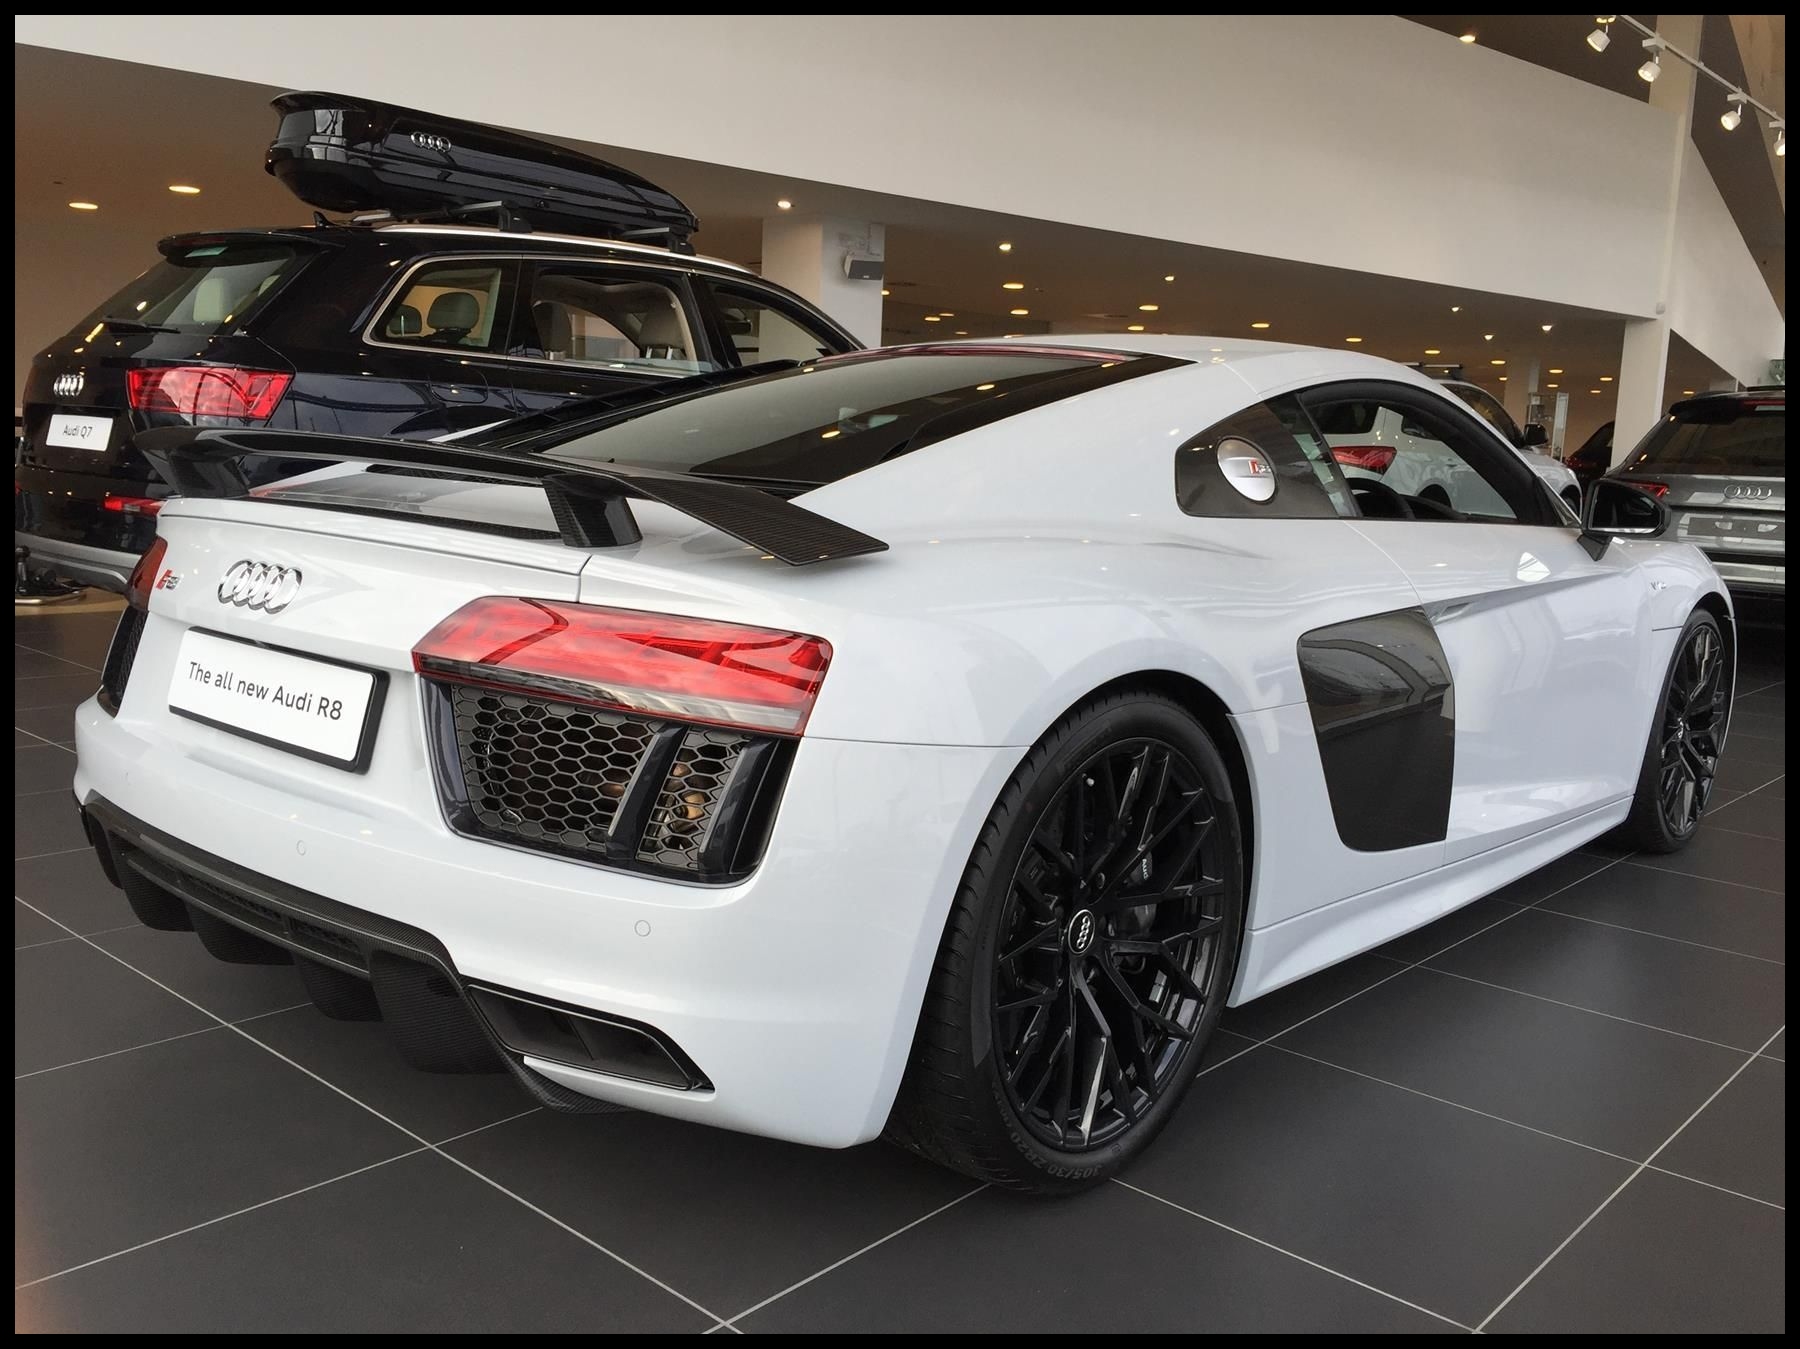 Used 2016 Audi R8 for sale in Bedford